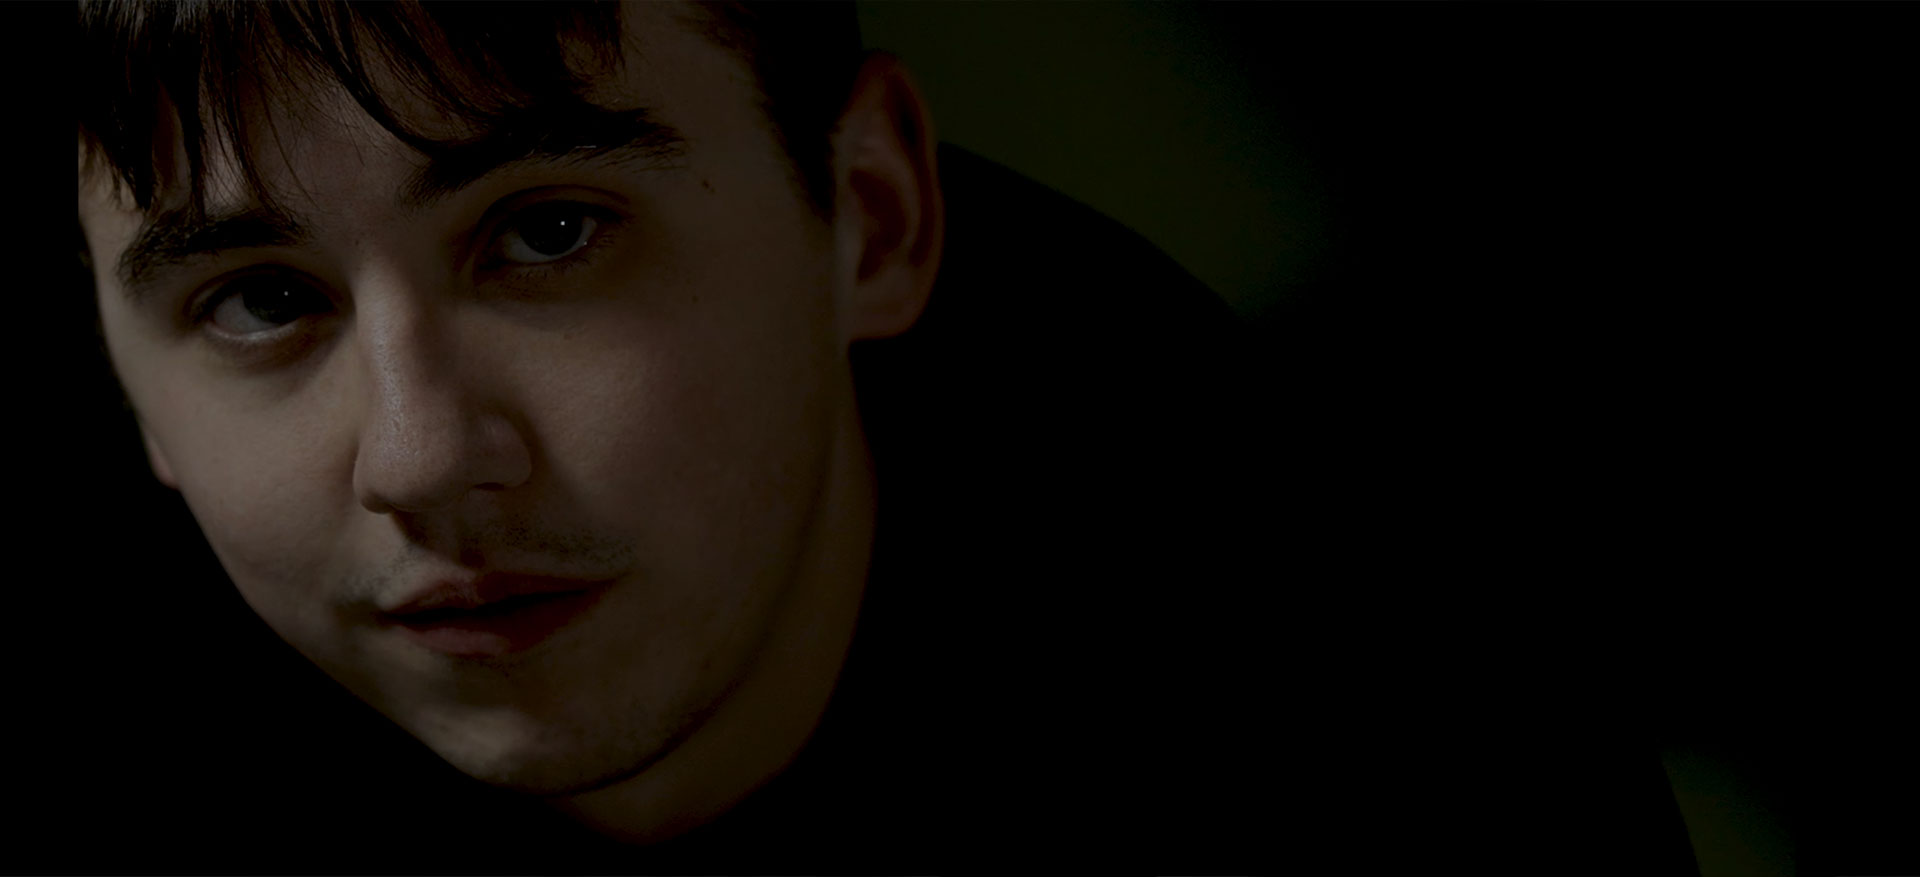 A screenshot from the video showing a boy in a dark room looking somber.